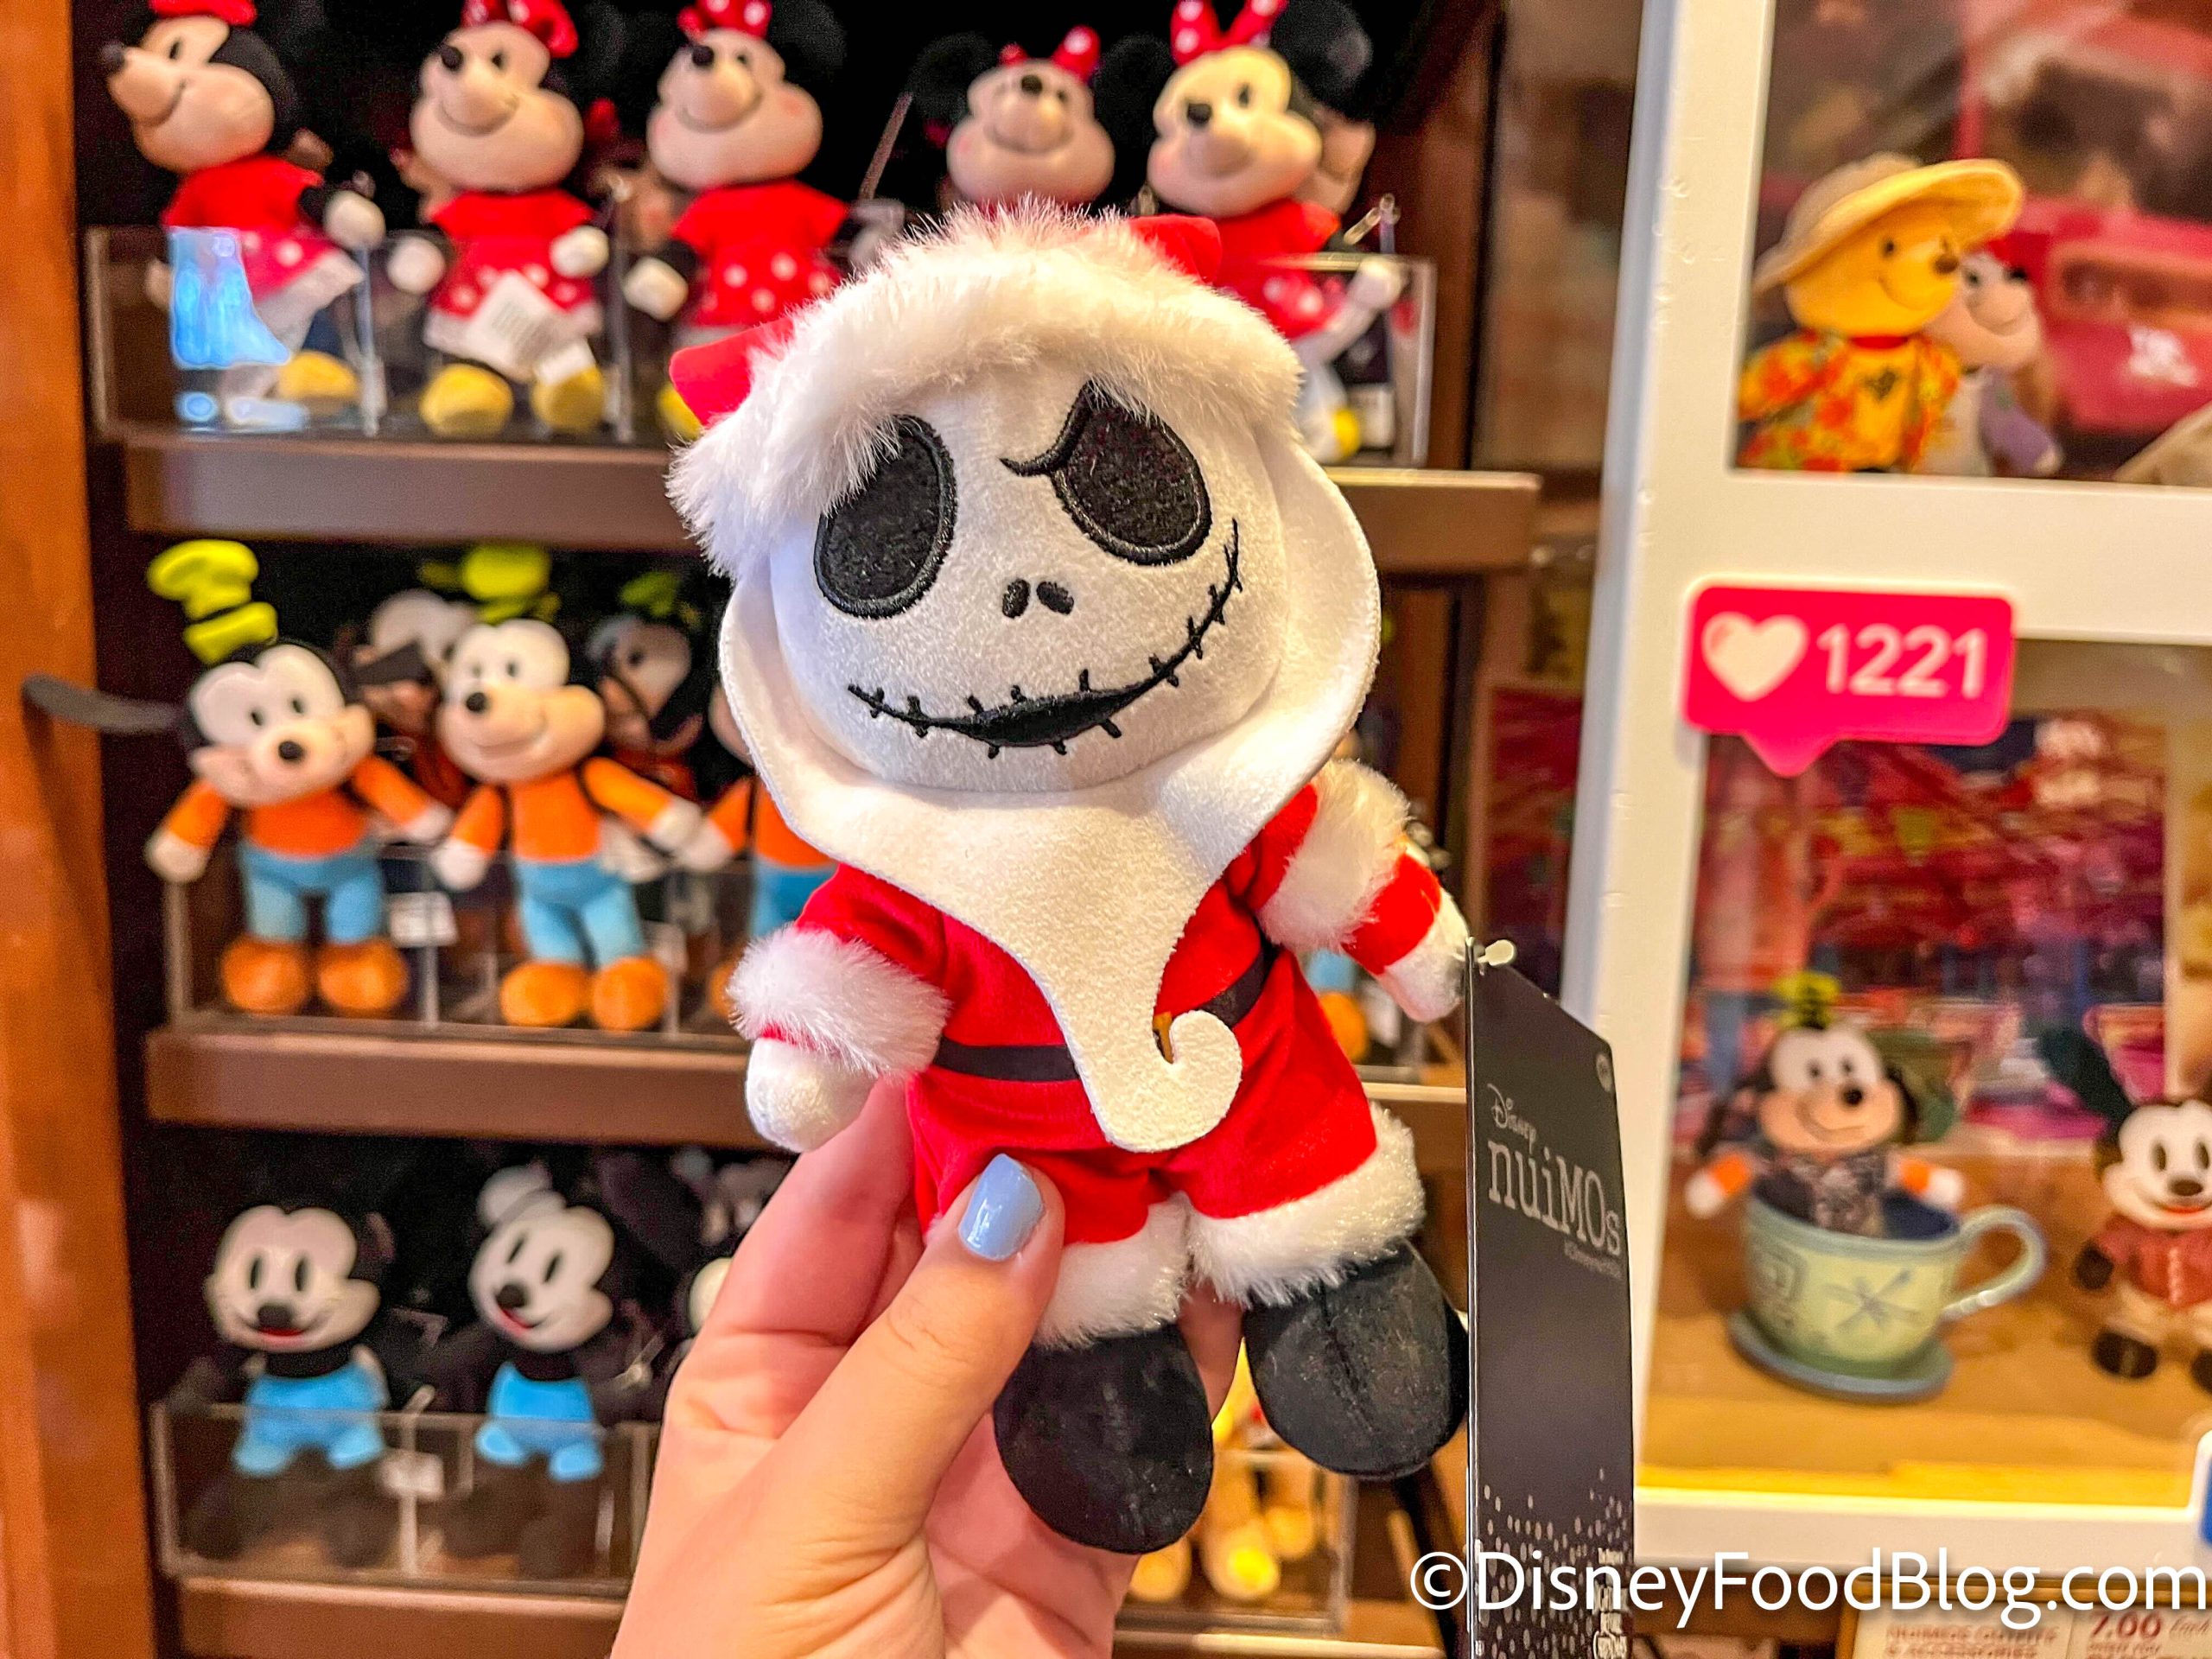 Souvenirs to Buy Before Your Disney Vacation